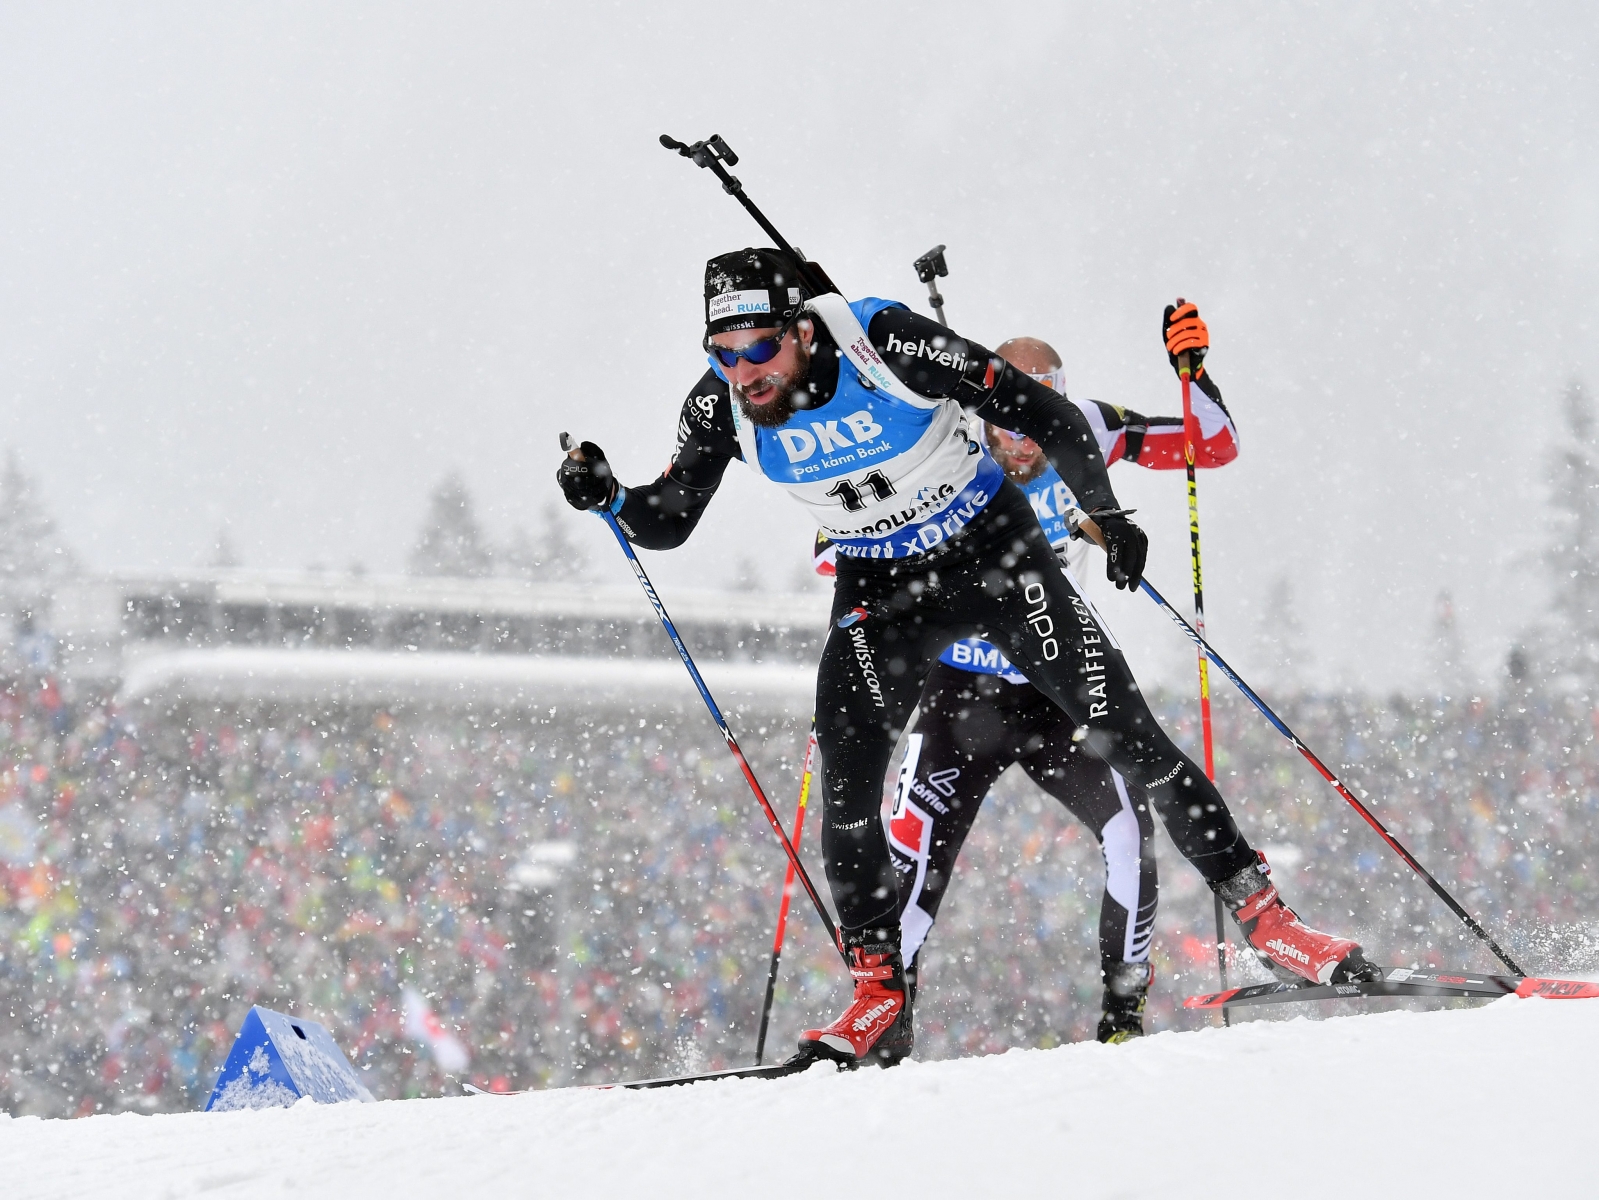 epa05718558 Switzerland's Benjamin Weger in action during the Men's 12,5 km Pursuit Competition at the Biathlon World Cup in Ruhpolding, Germany, 15 January 2017.  EPA/KERSTIN JOENSSONBenjamin Weger BIATHLON WELTCUP 2016/17 OBERHOF